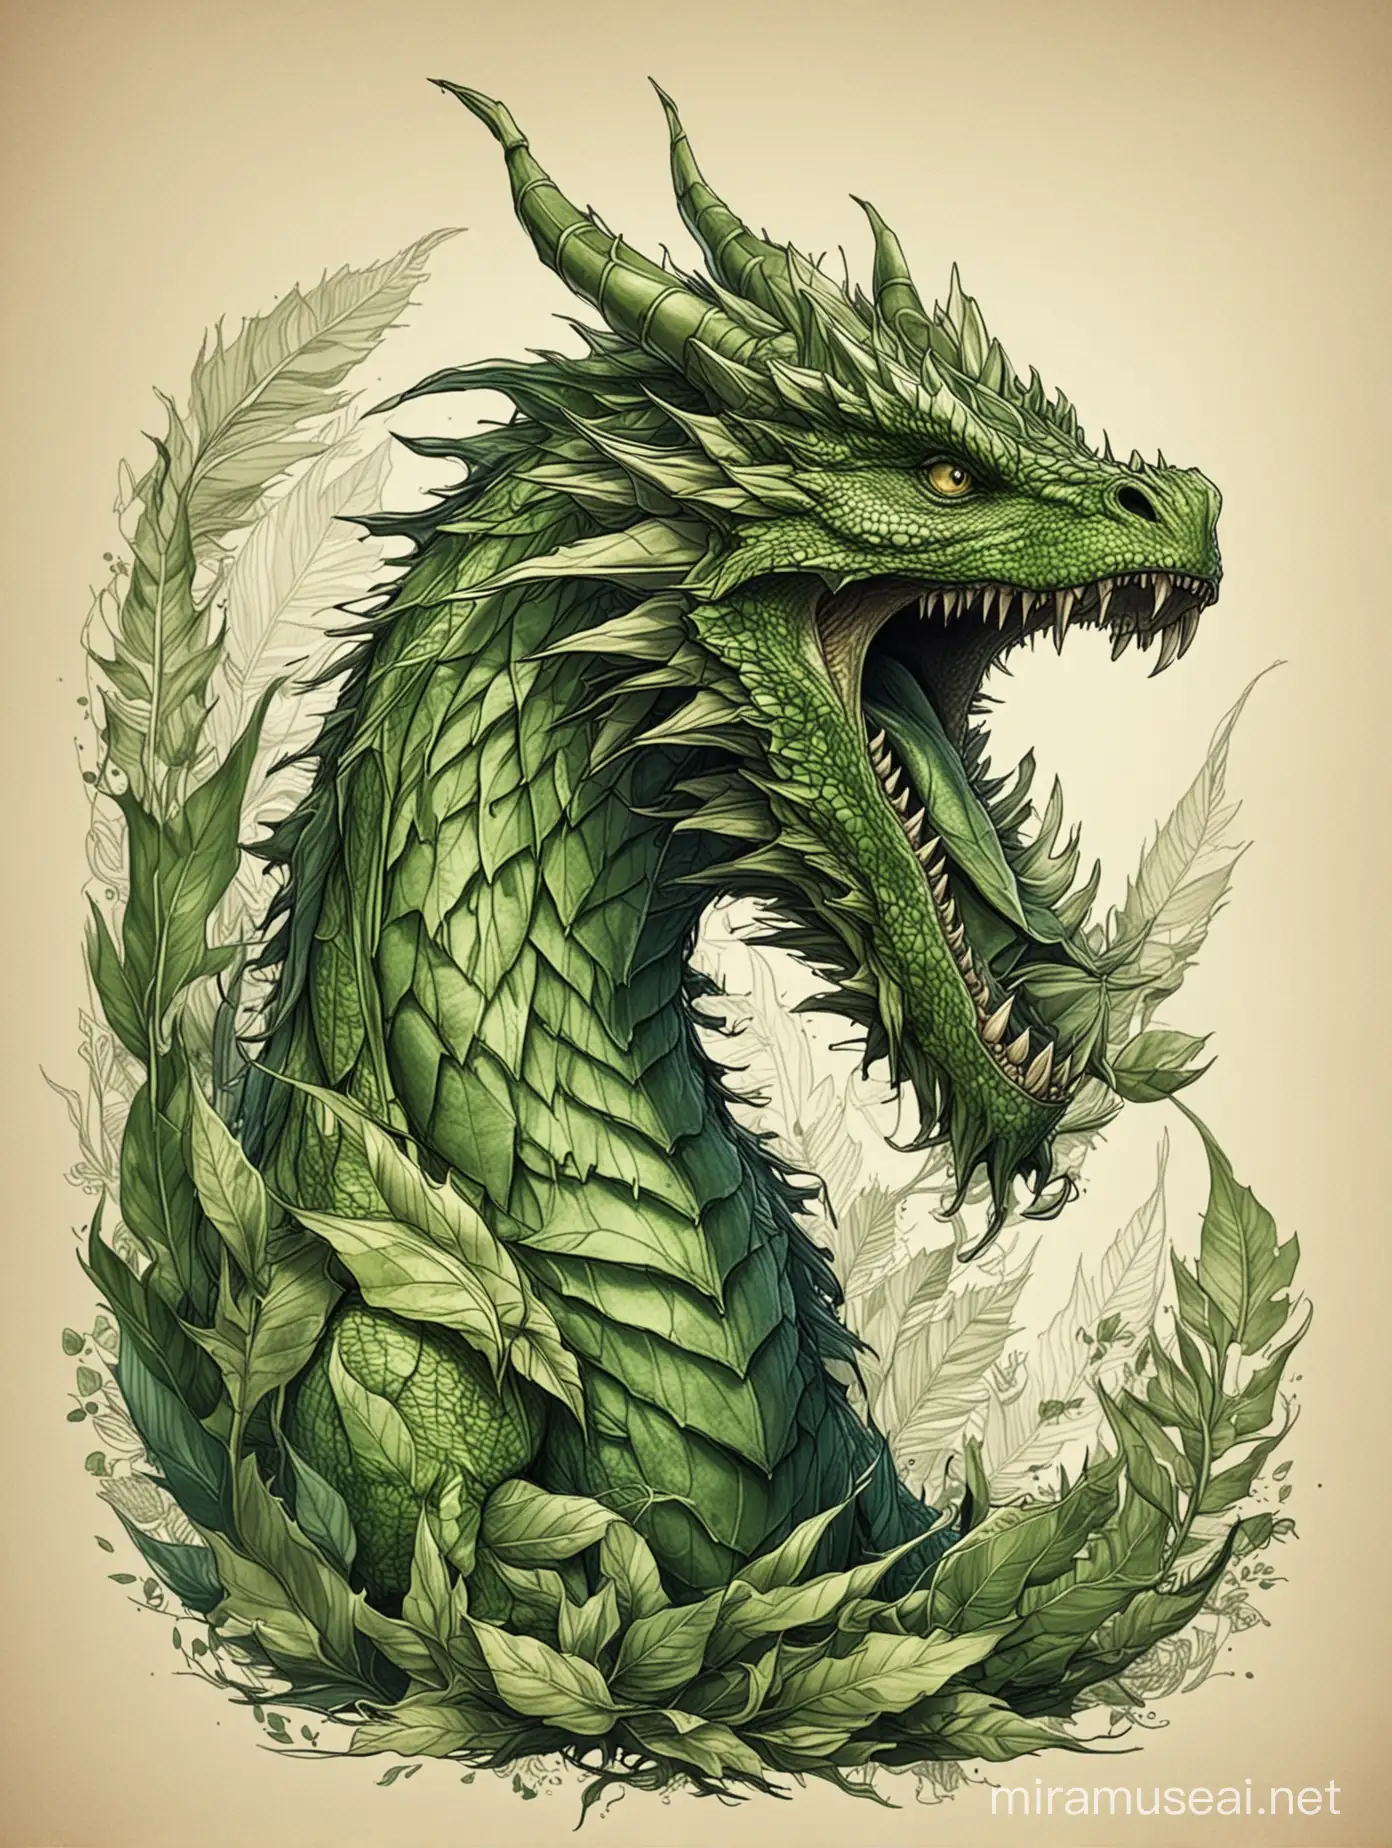 Ladon, a dragon made of leafs, green, roaring, angry, sketch style